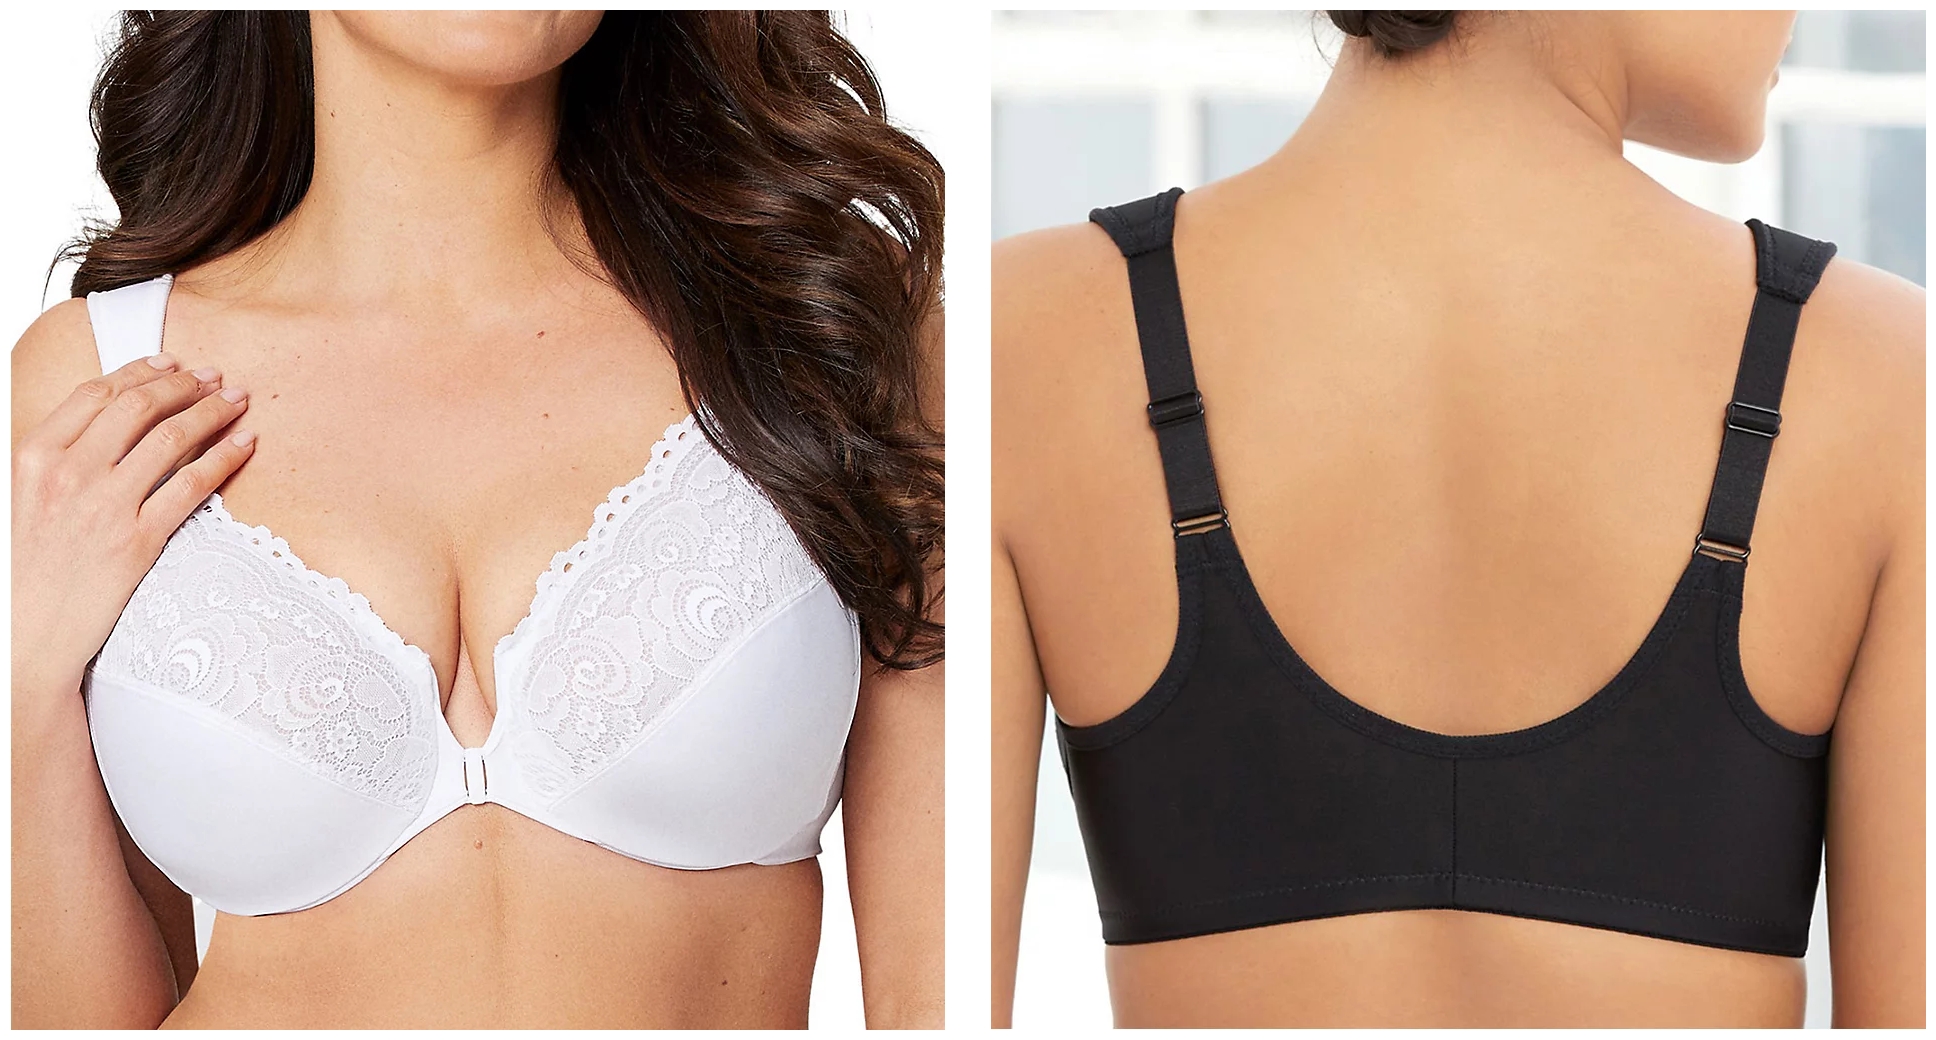 Large size bras with a front closure are easy to put on and take off.